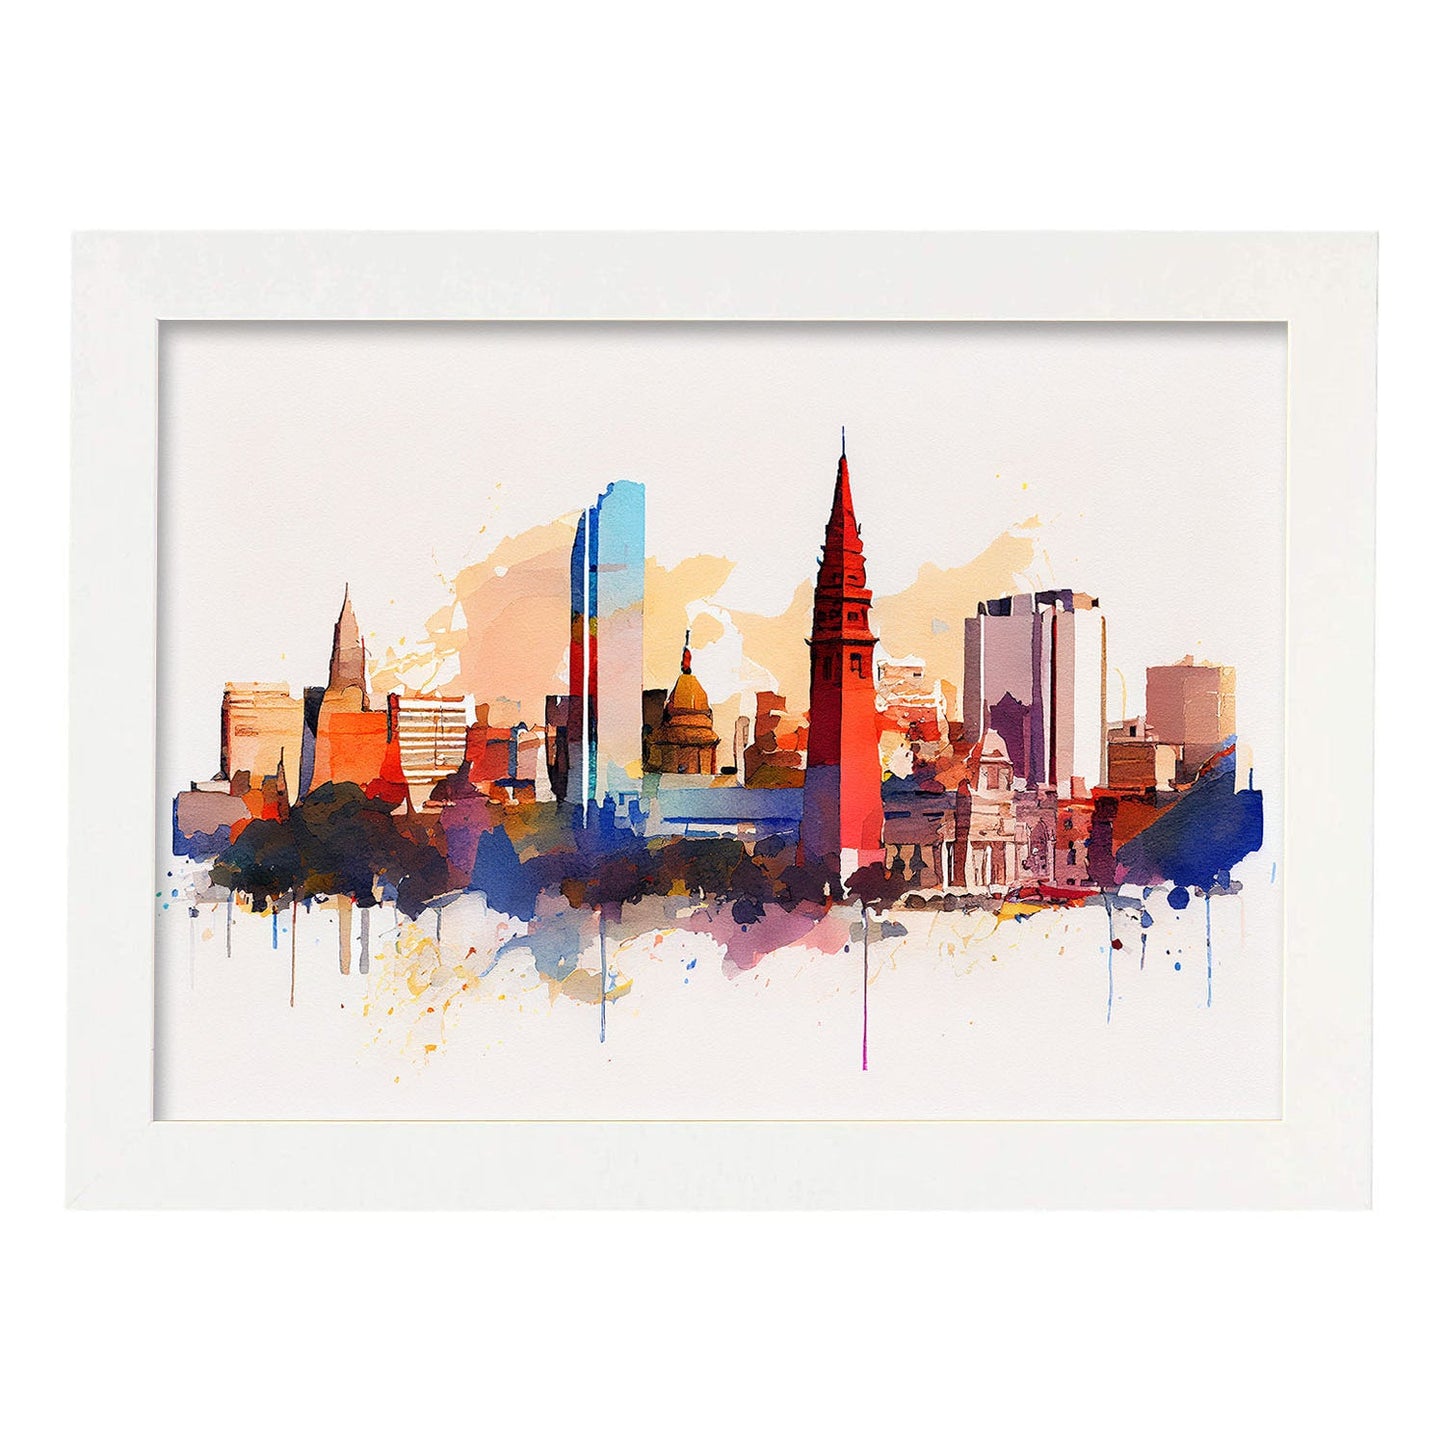 Nacnic watercolor of a skyline of the city of Buenos Aires_4. Aesthetic Wall Art Prints for Bedroom or Living Room Design.-Artwork-Nacnic-A4-Marco Blanco-Nacnic Estudio SL